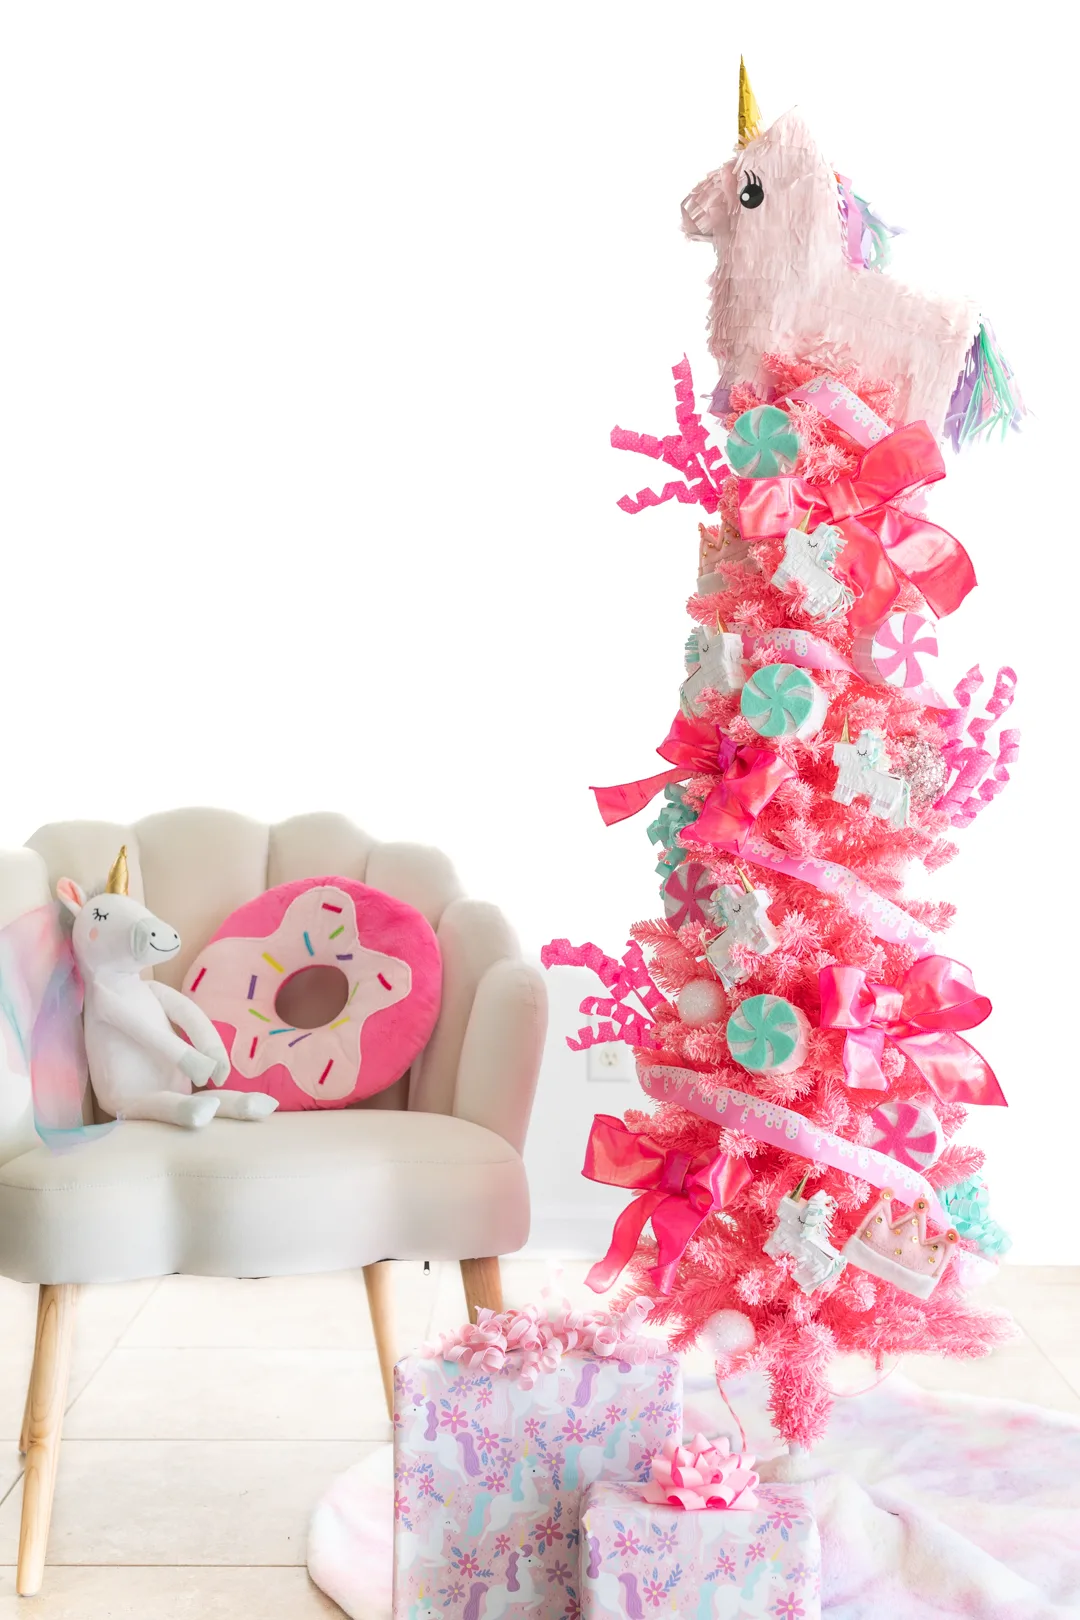 pink unicorn themed christmas tree, shell chair with donut pillow and unicorn stuffed animal. unicorn wrapping paper gifts under the tree. pastel colored tree skirt.